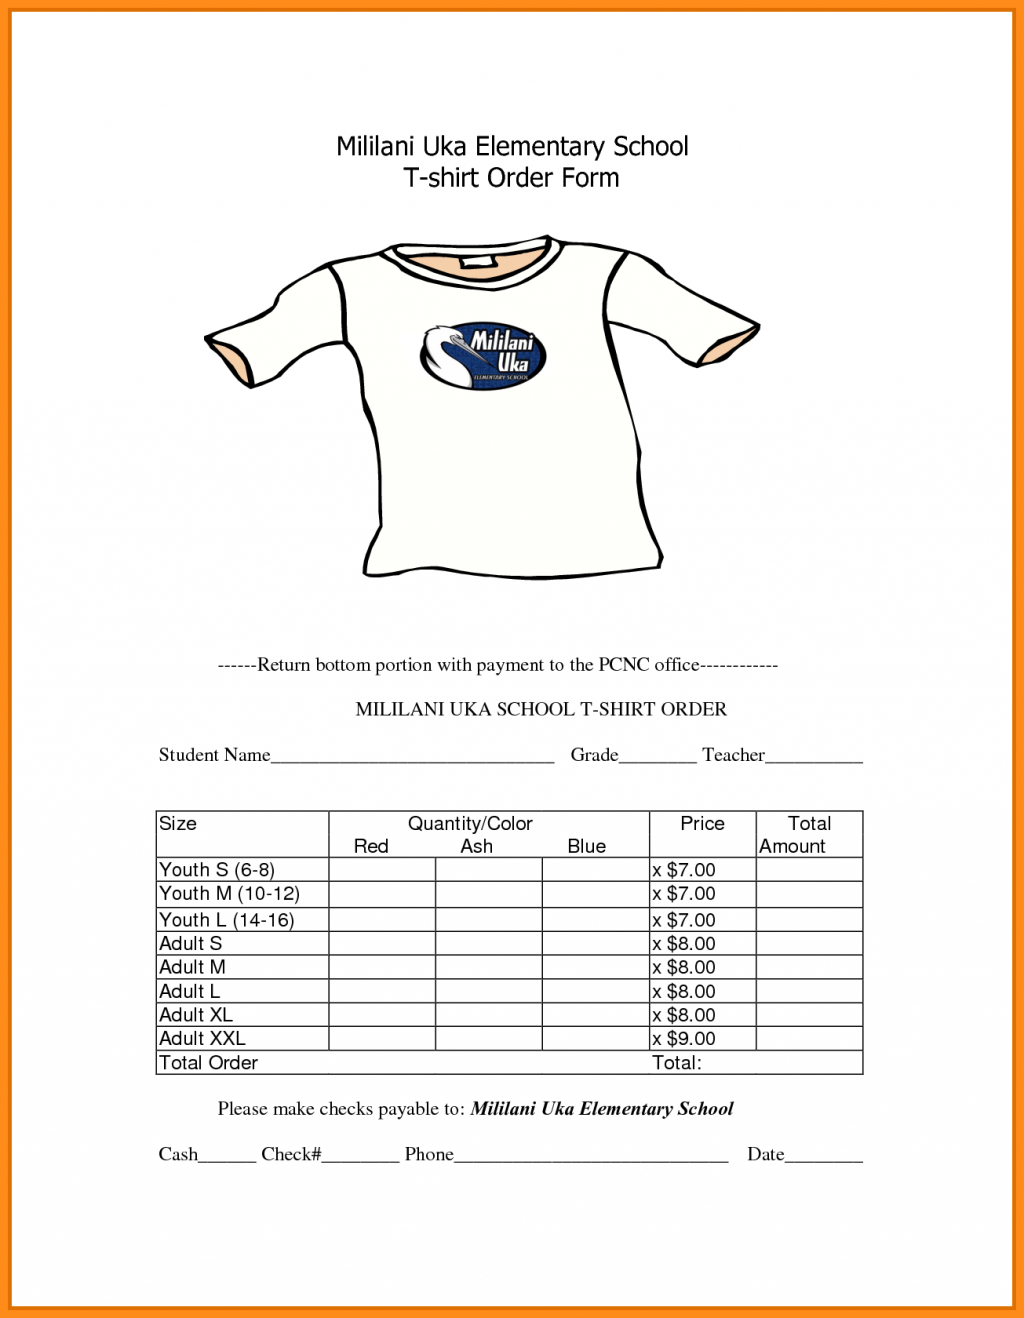 Blank Tshirt Template Printable « Alzheimer's Network Of Oregon for Blank T Shirt Order Form Template